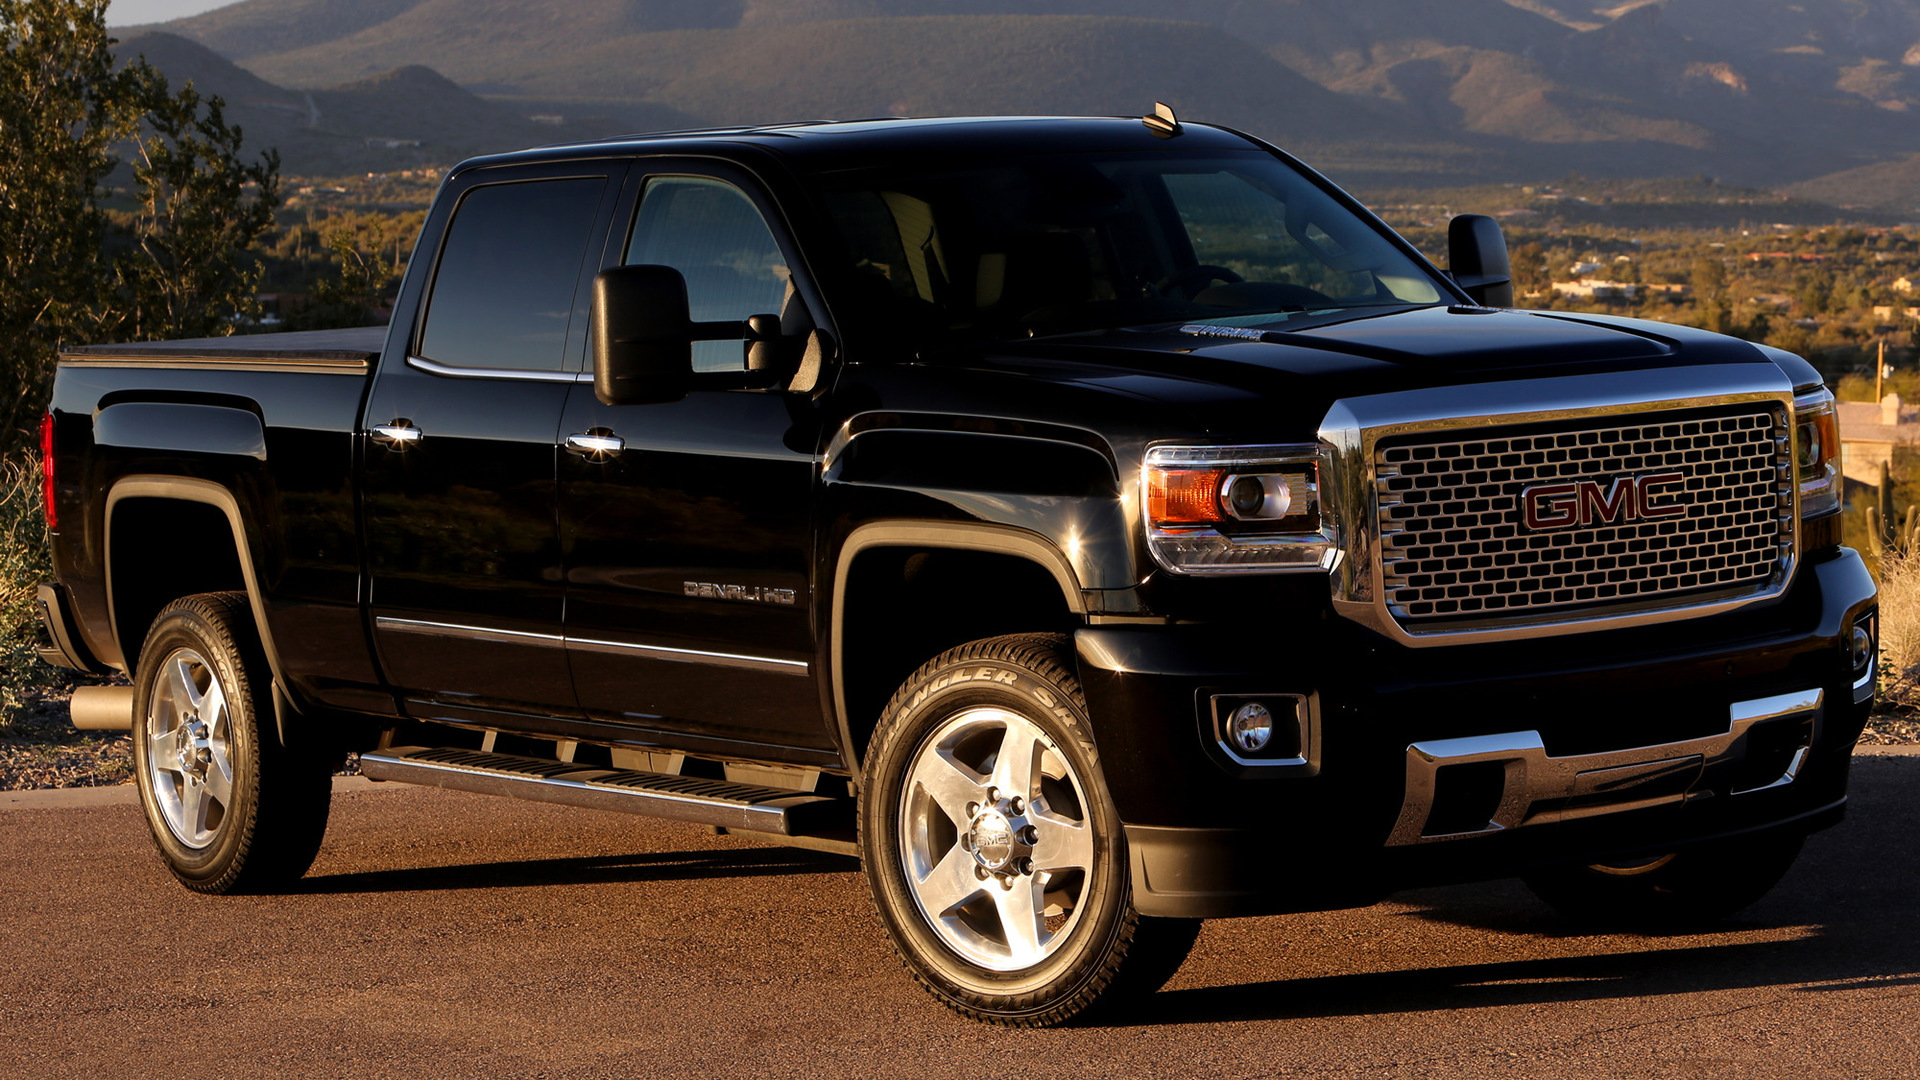 2015 GMC Sierra Denali 2500 HD Crew Cab - Wallpapers and HD Images ...